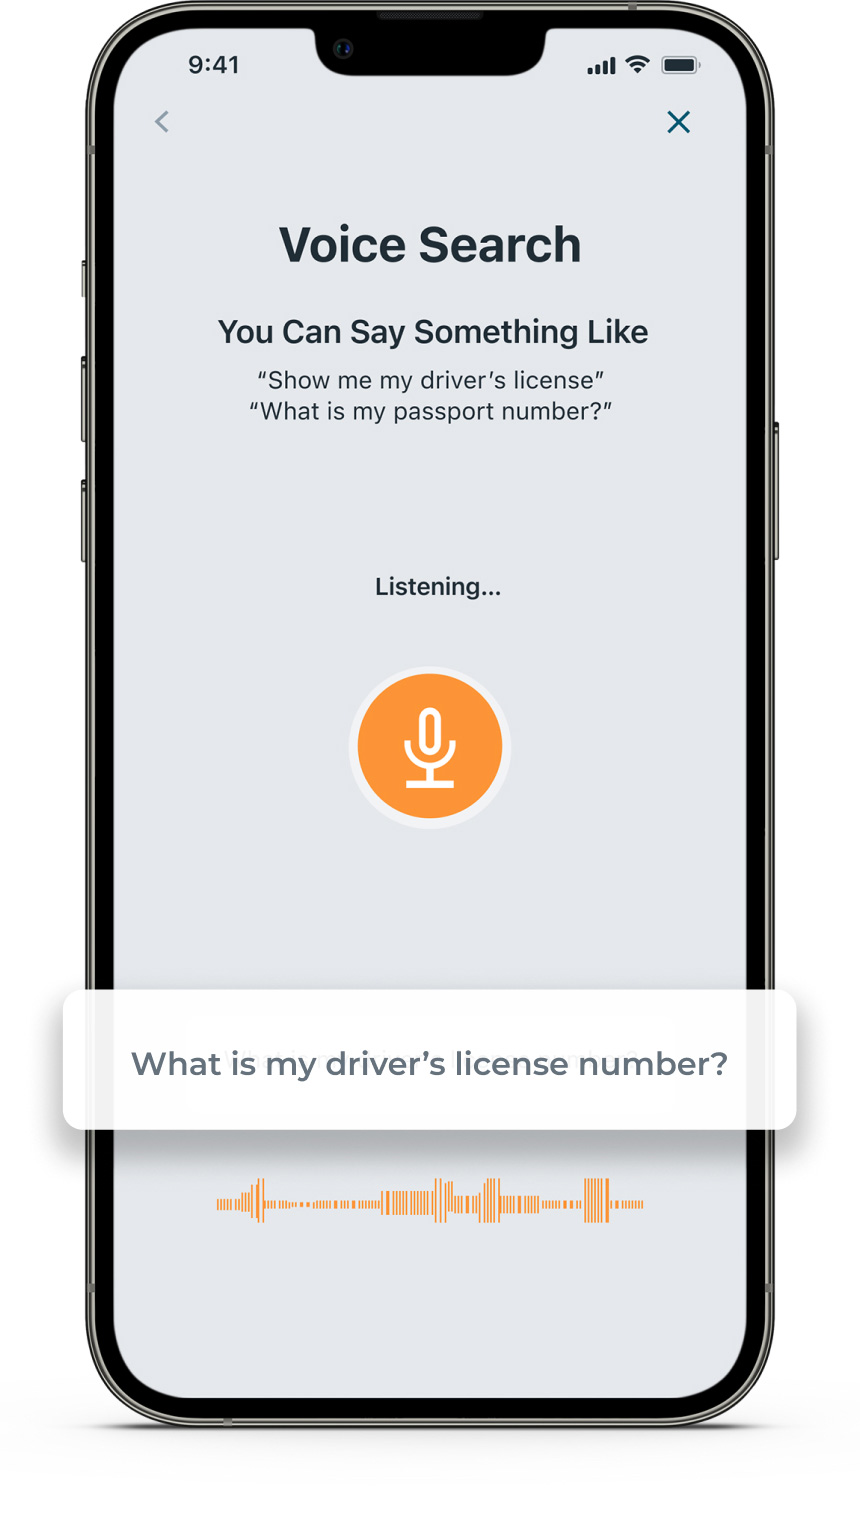 Collect'd Voice Search: Show Me My Driver's Licence or What's My Passport Number